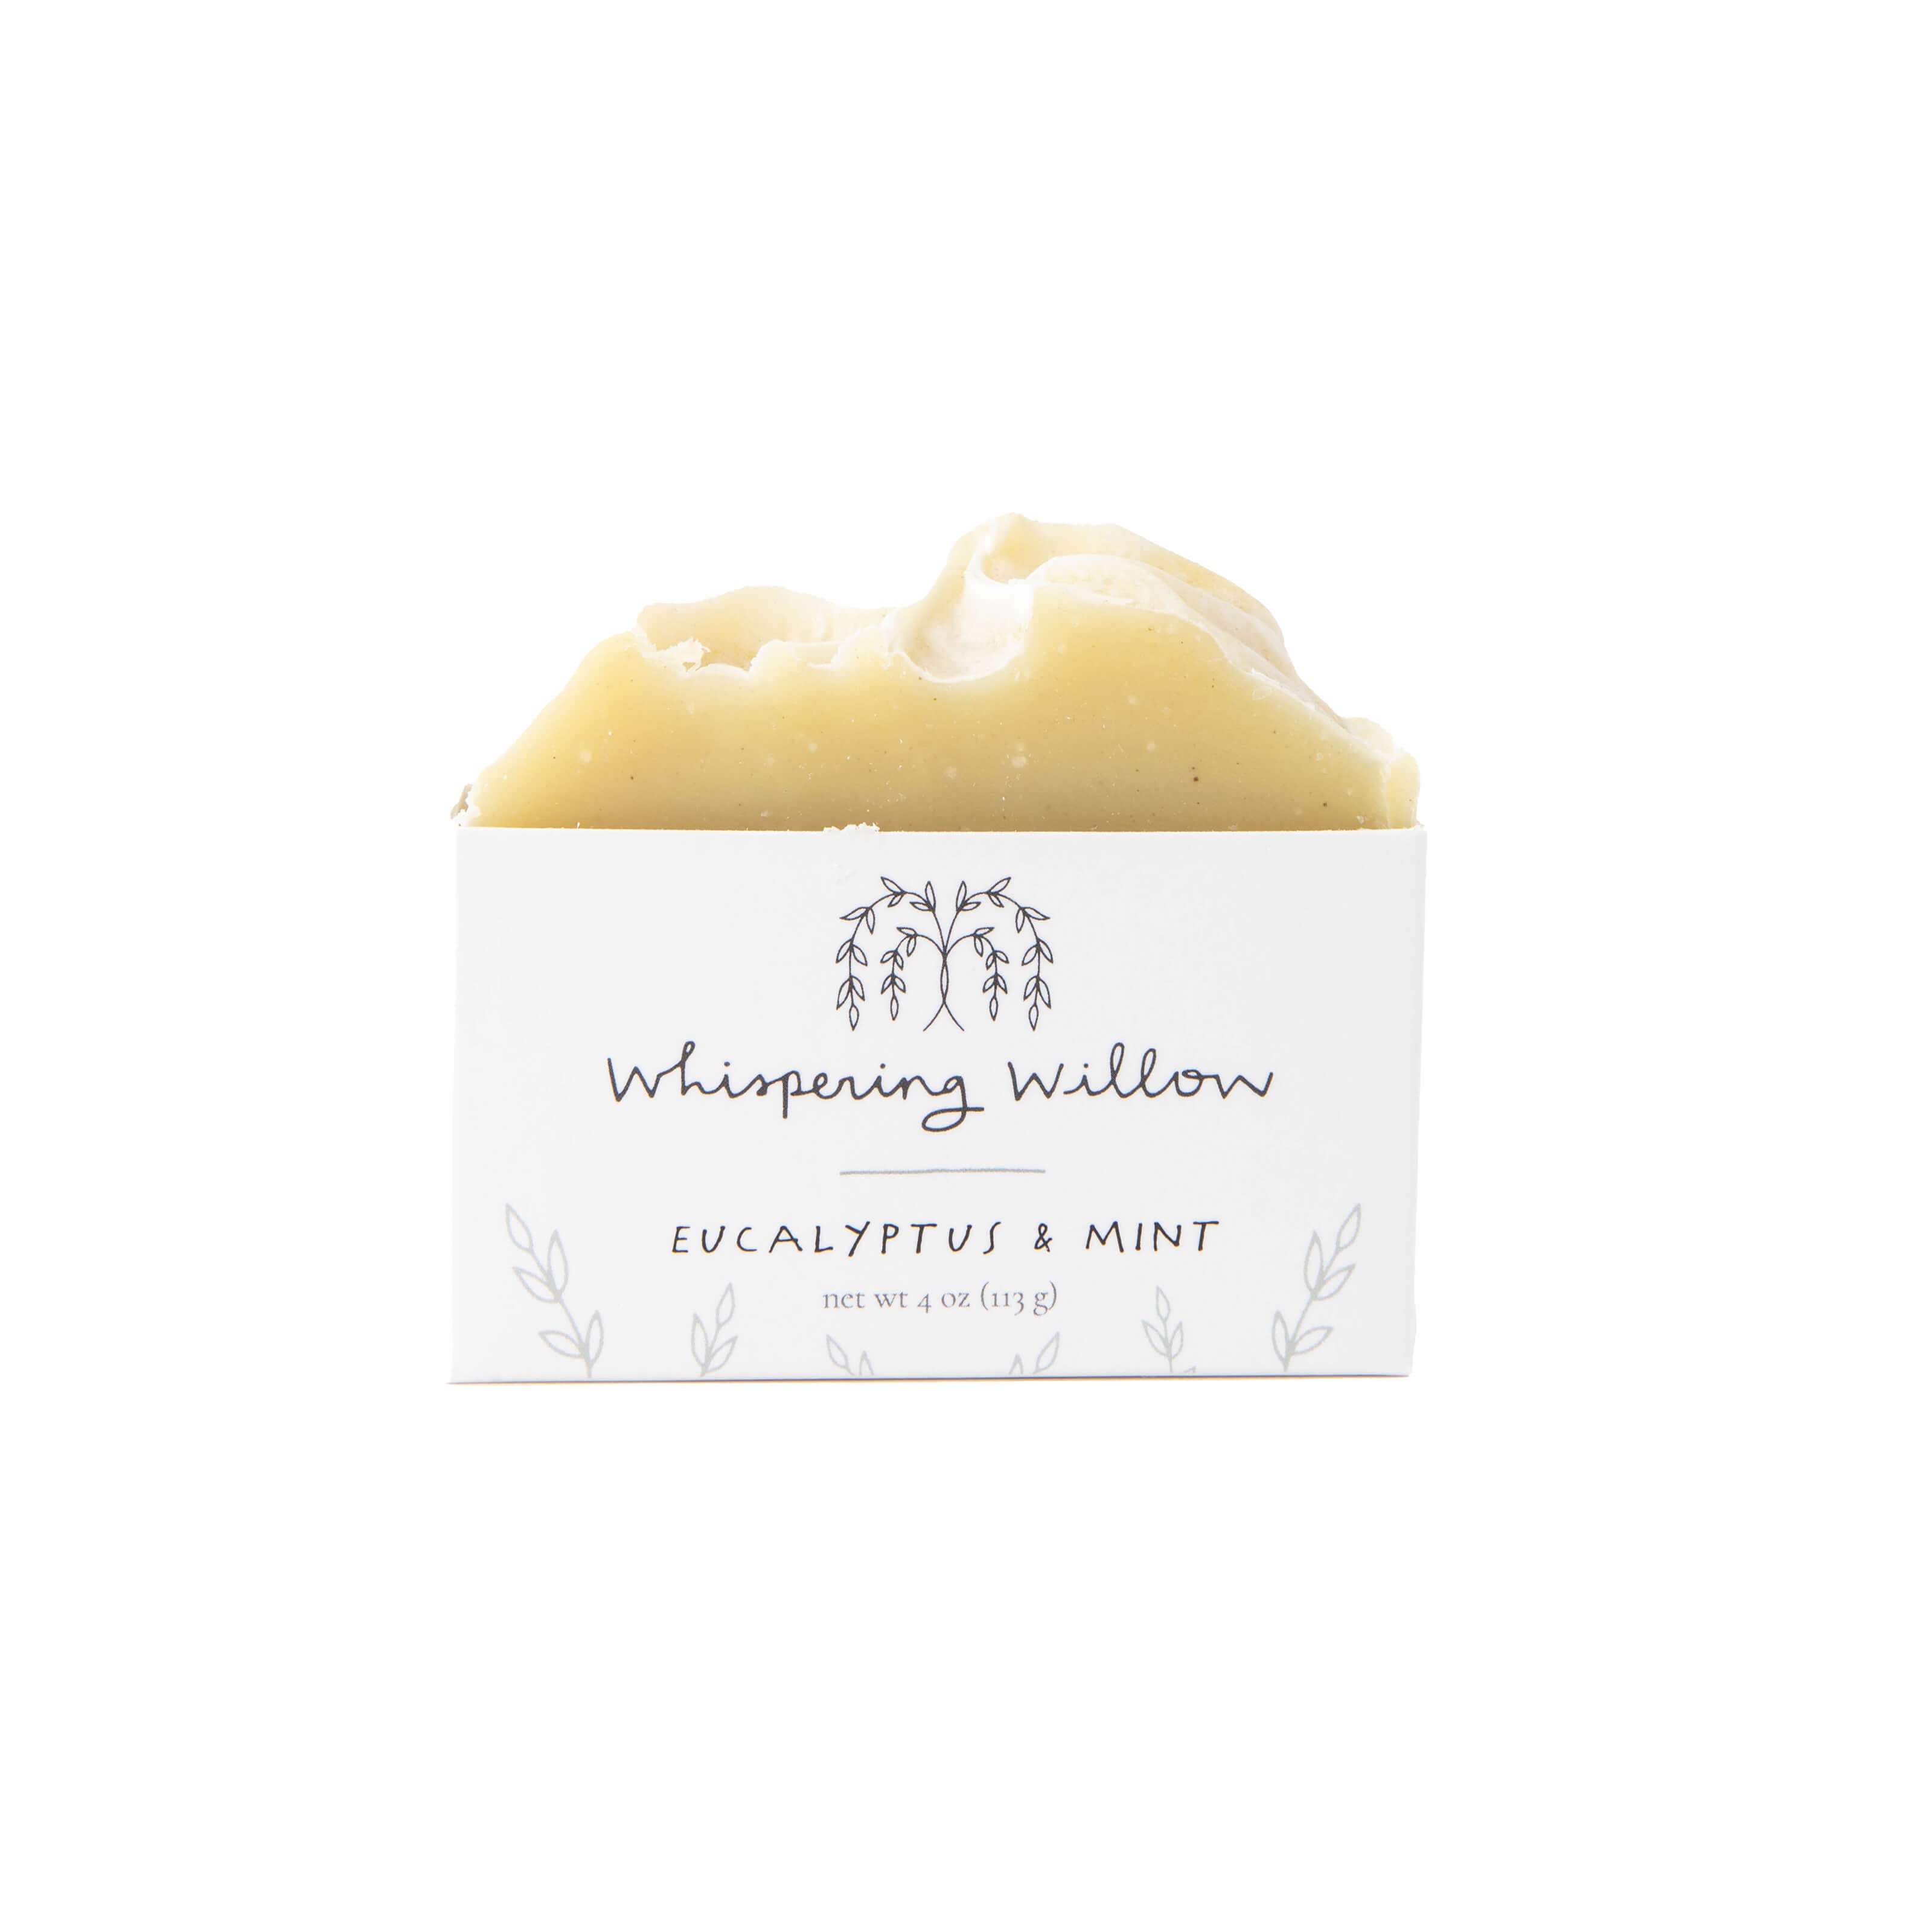 Eucalyptus + Mint Bar Soap by Whispering Willow